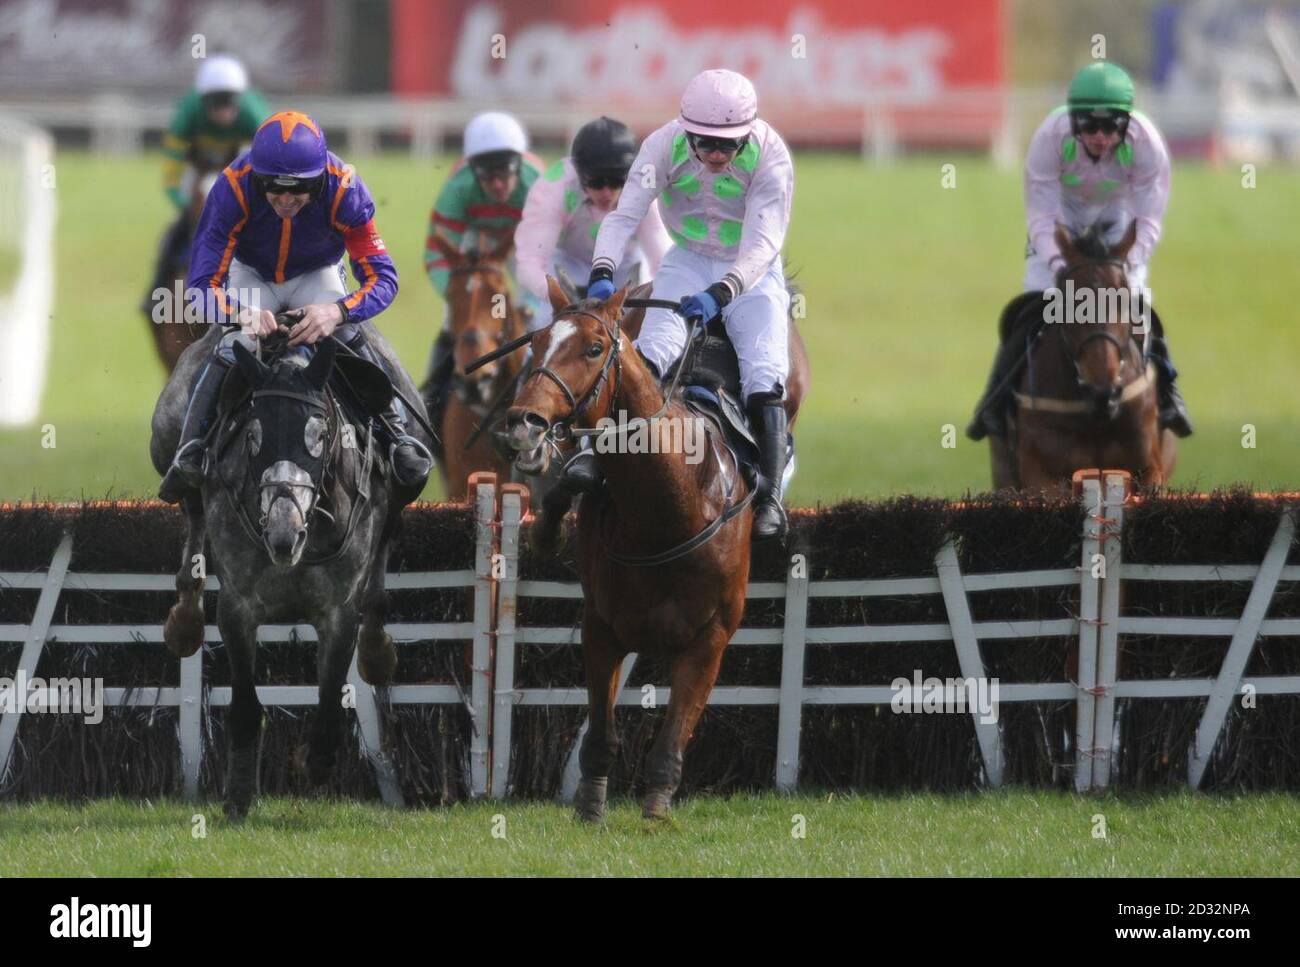 Diakali ridden by jockey Ruby Walsh (left) on their way to victory in the AES Champion Four Year Old Hurdle during the AES Festival Family Day of the 2013 Festival at Punchestown Racecourse, Co Kildare, Ireland. Stock Photo